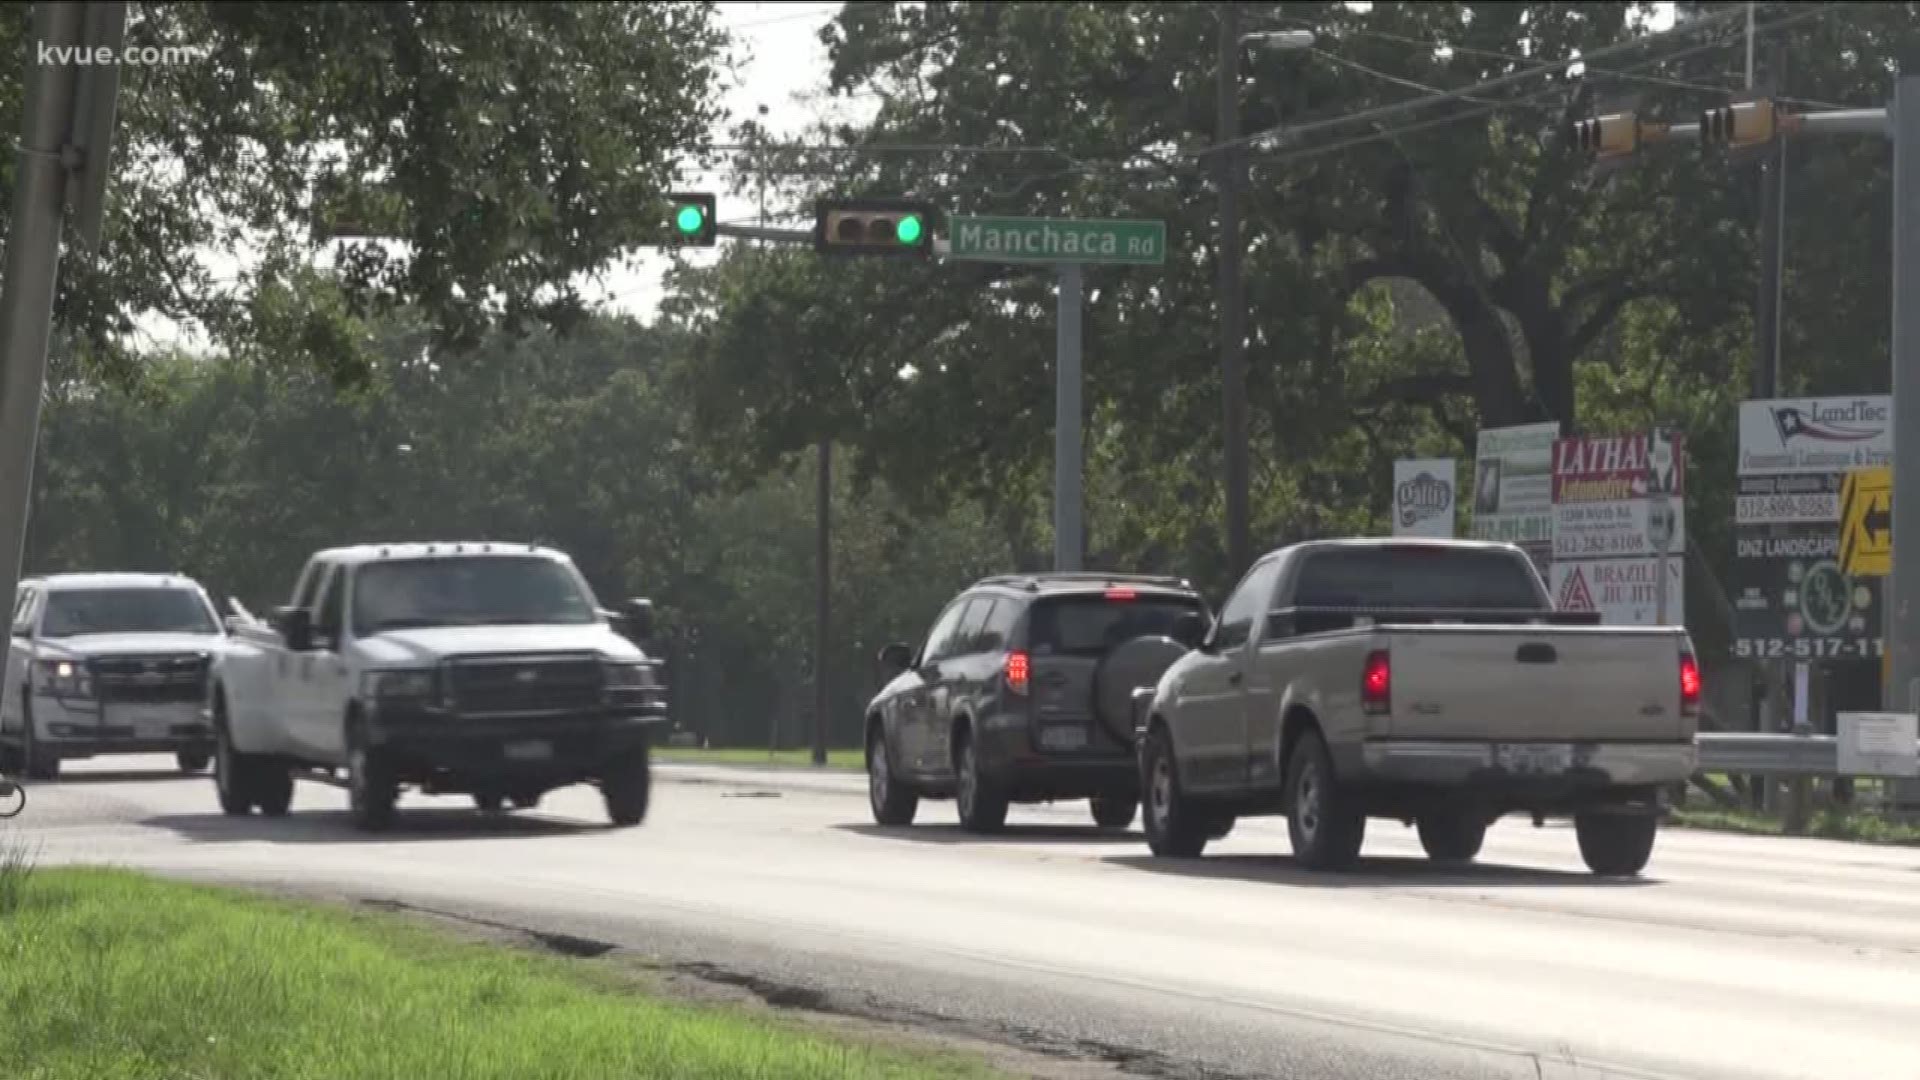 It's a busy street in Austin, and its name often gets mispronounced by newcomers or visitors: Manchaca Road.

And on Thursday, the Austin City Council voted to change the name to Menchaca Road. This reflects the historical spelling of the man the road was